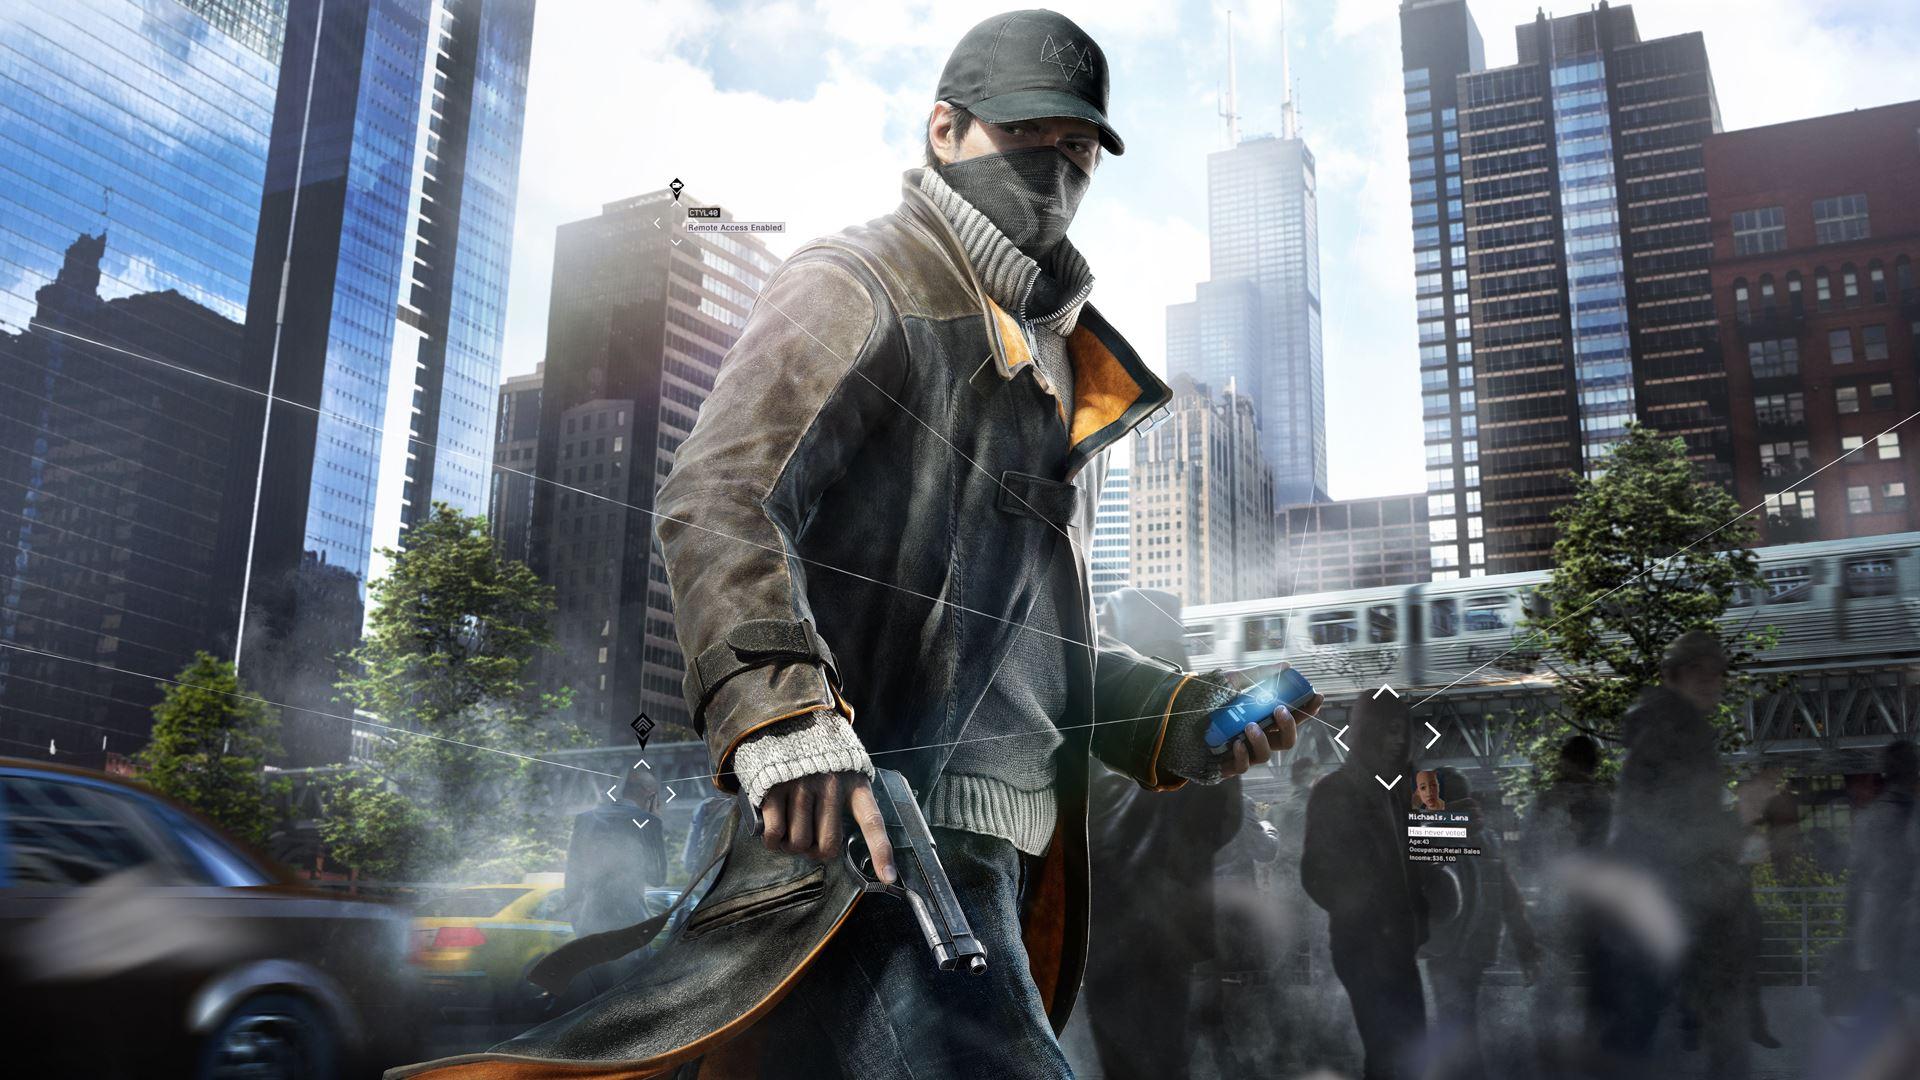 Watch Dogs Legion leaks ahead of E and could deliver Brexit before